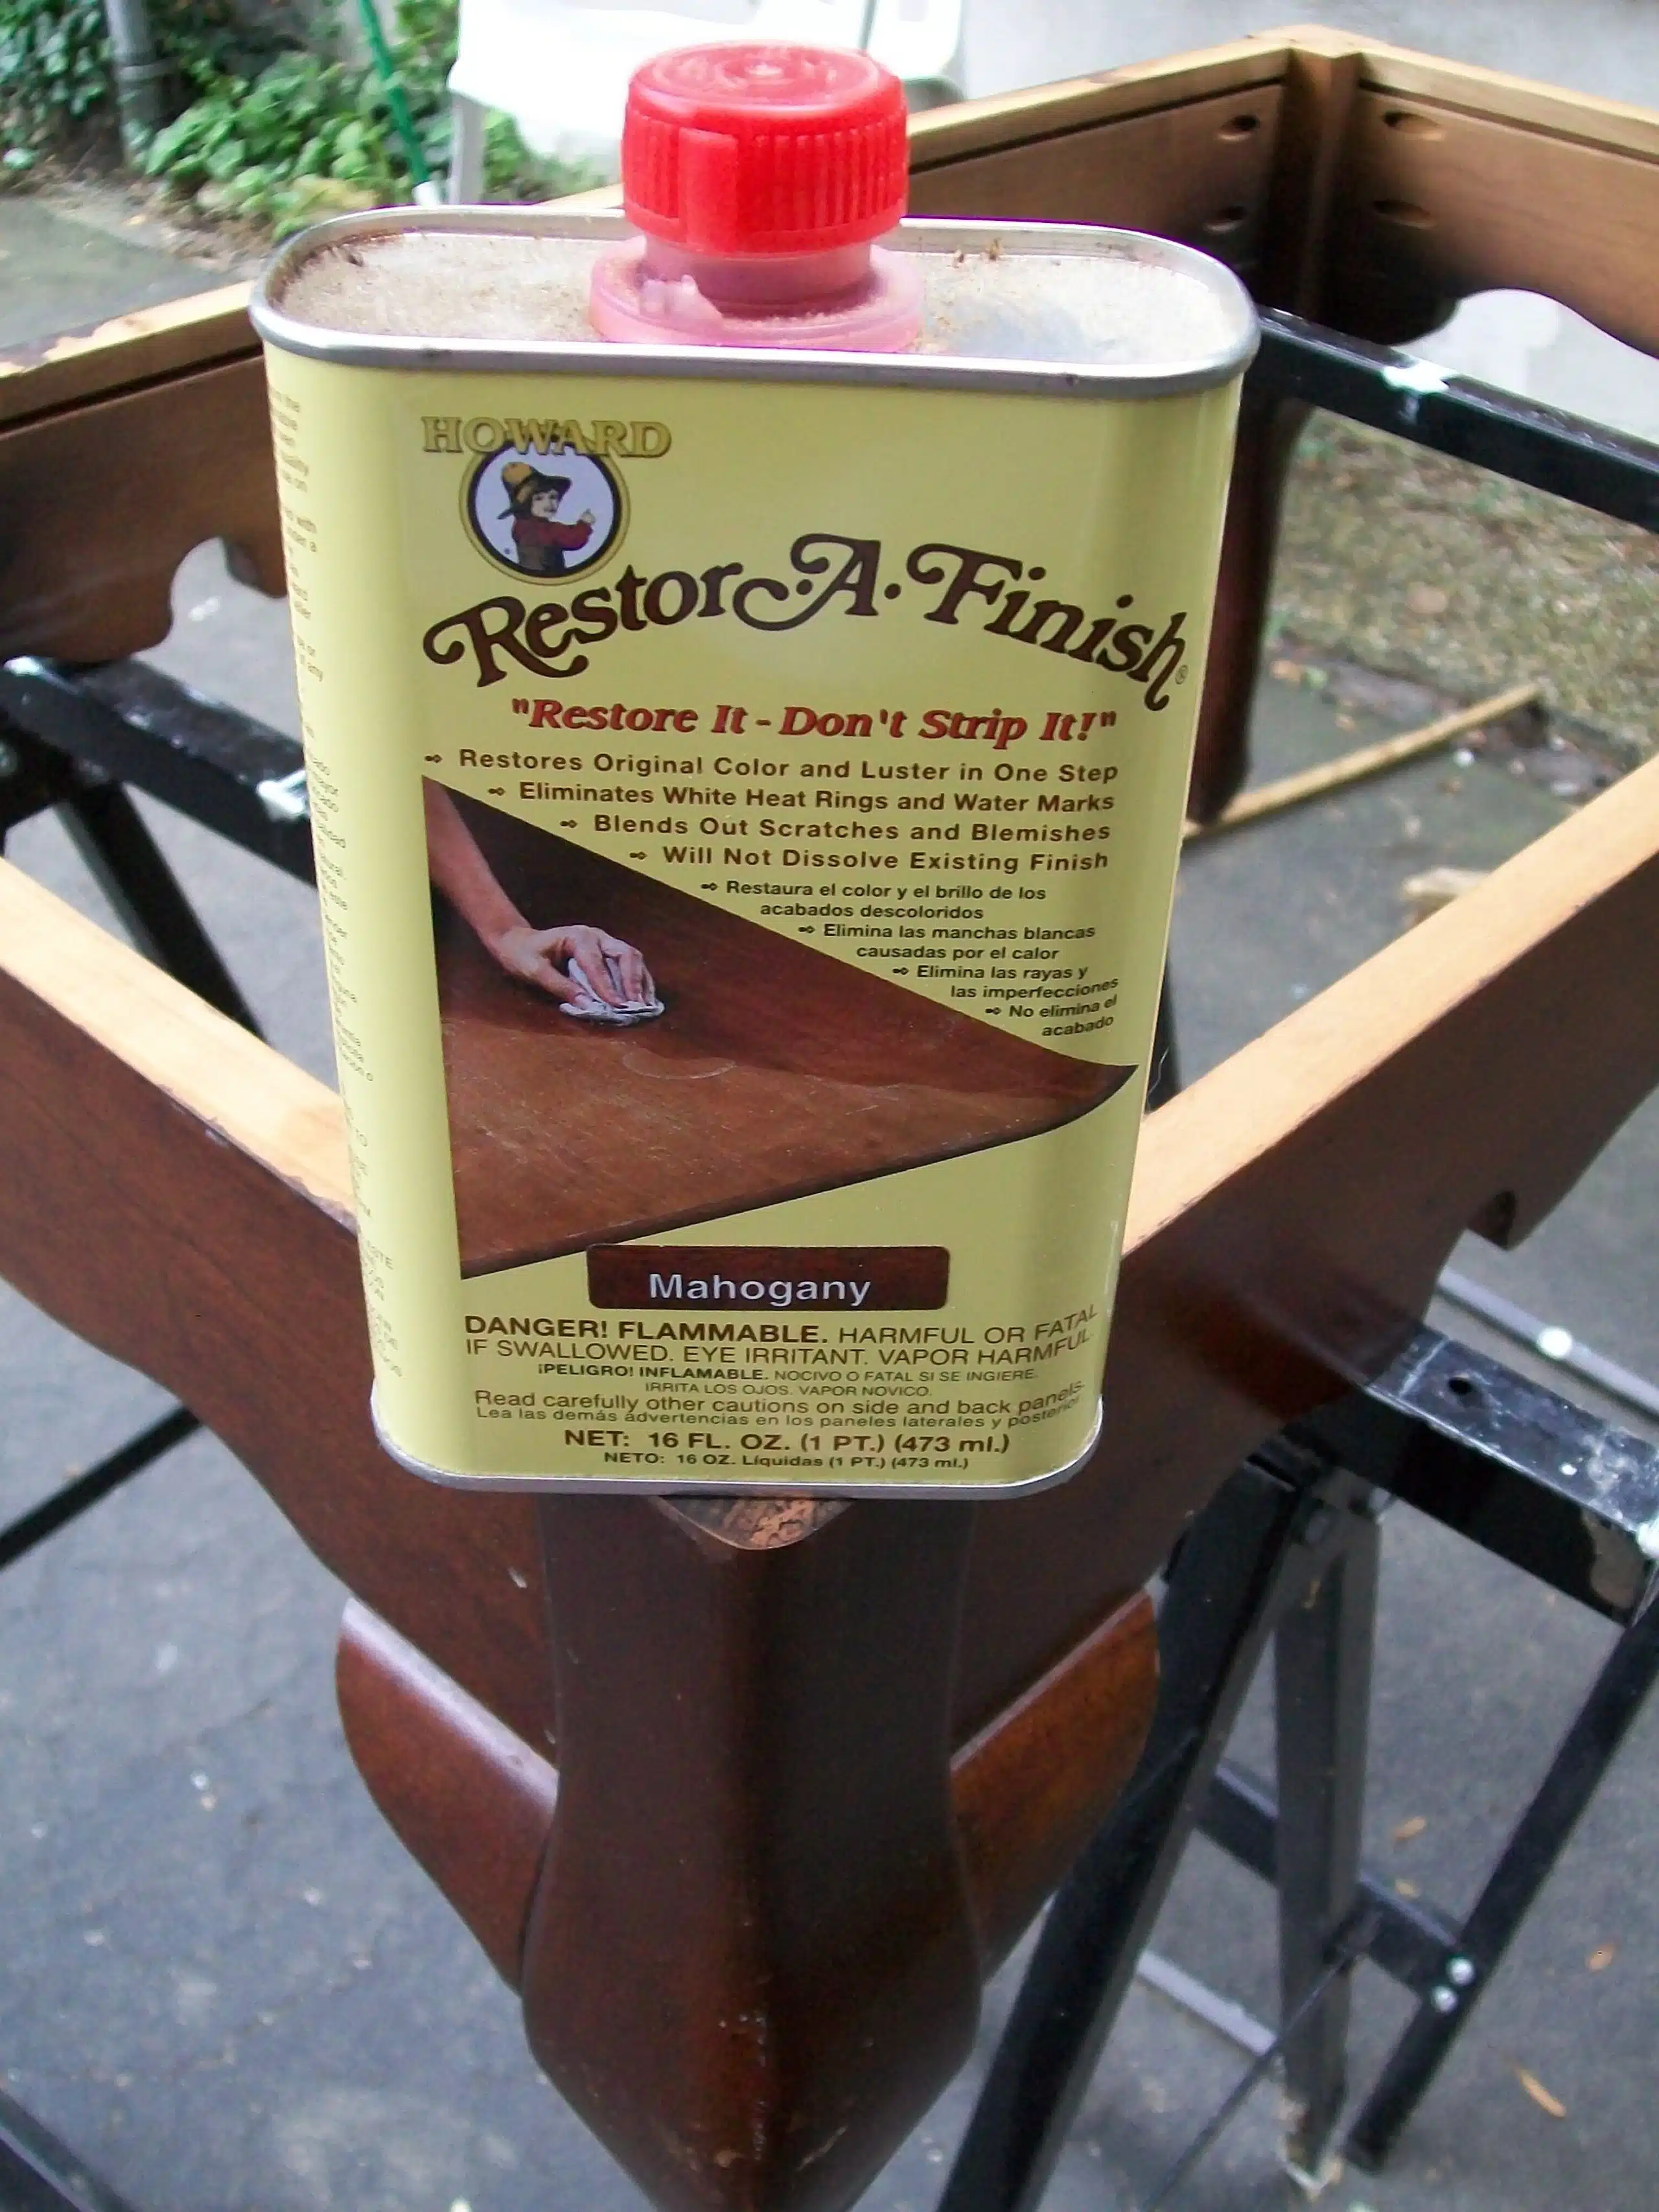 DIY Project: Restoring Wood With Howard's Restor-A-Finish in Minutes